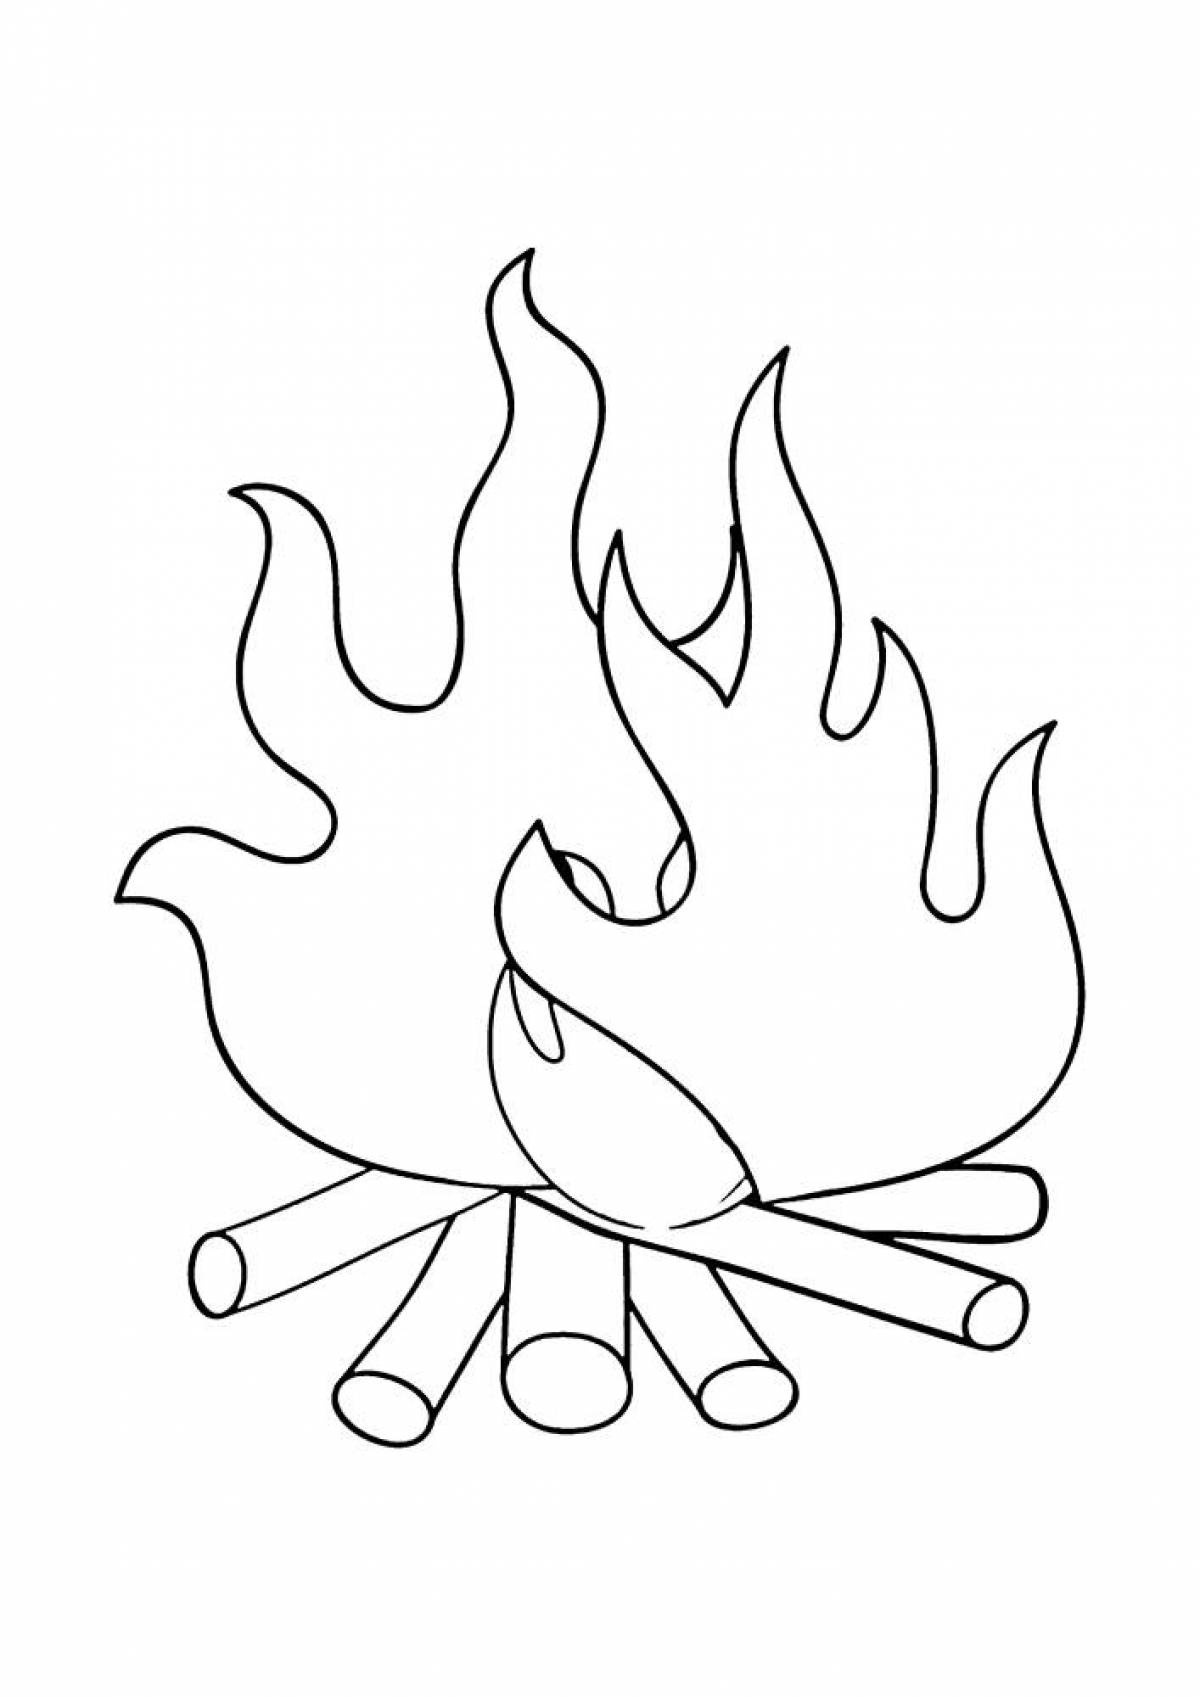 Smoldering fire coloring page